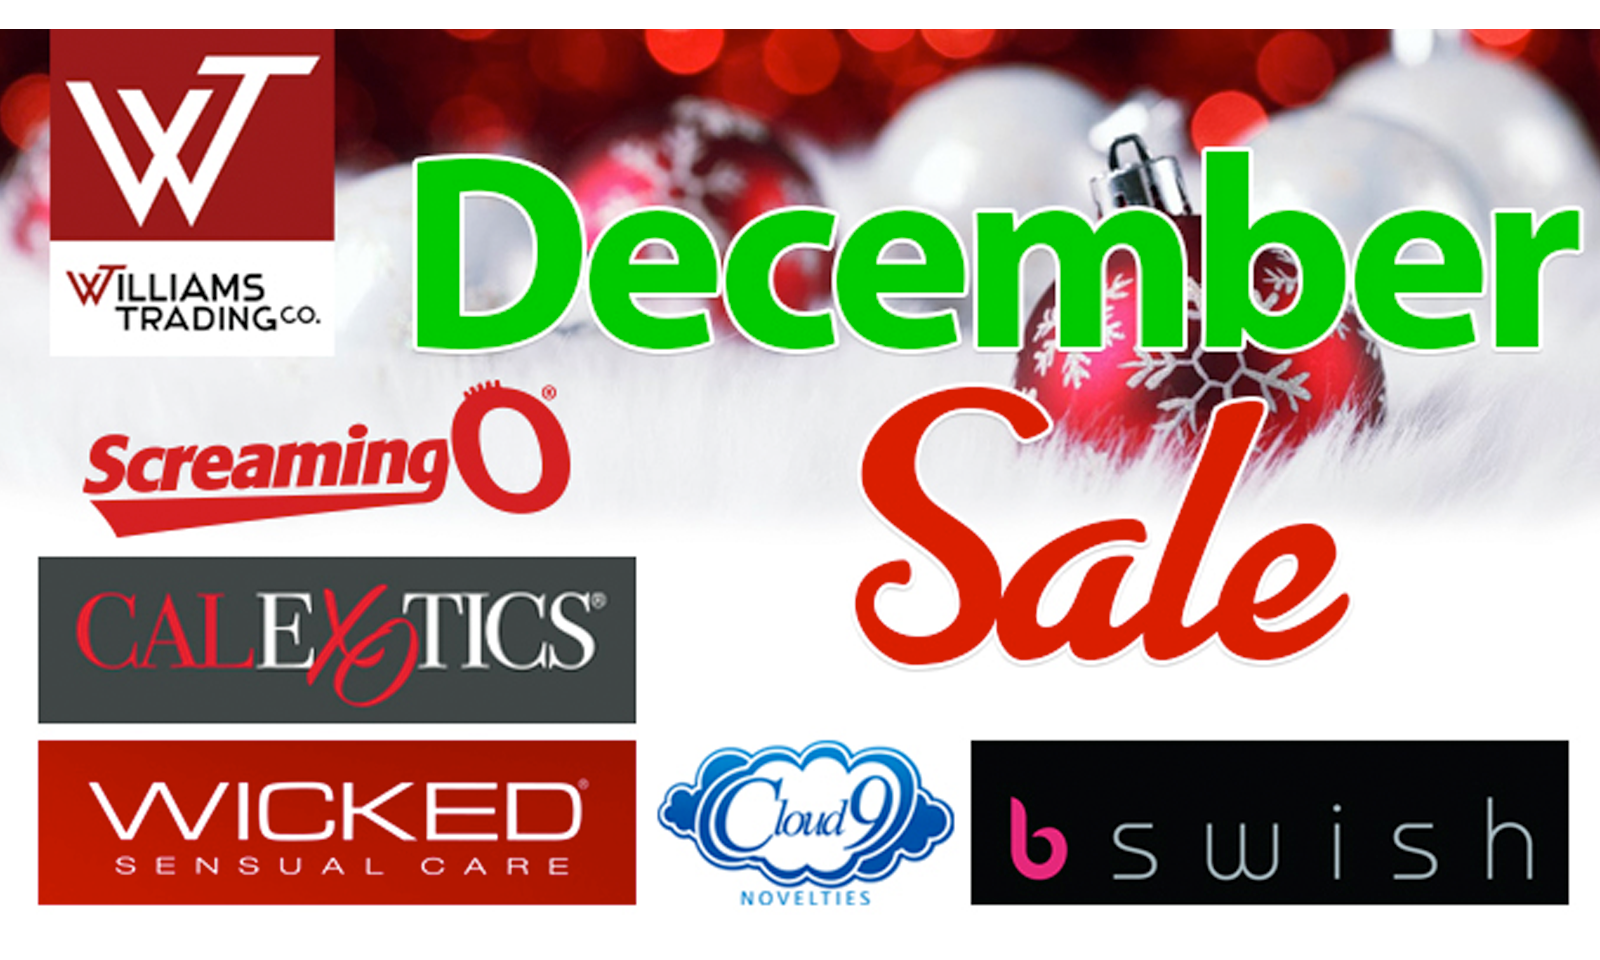 December Holiday Sales On At Williams Trading Co.